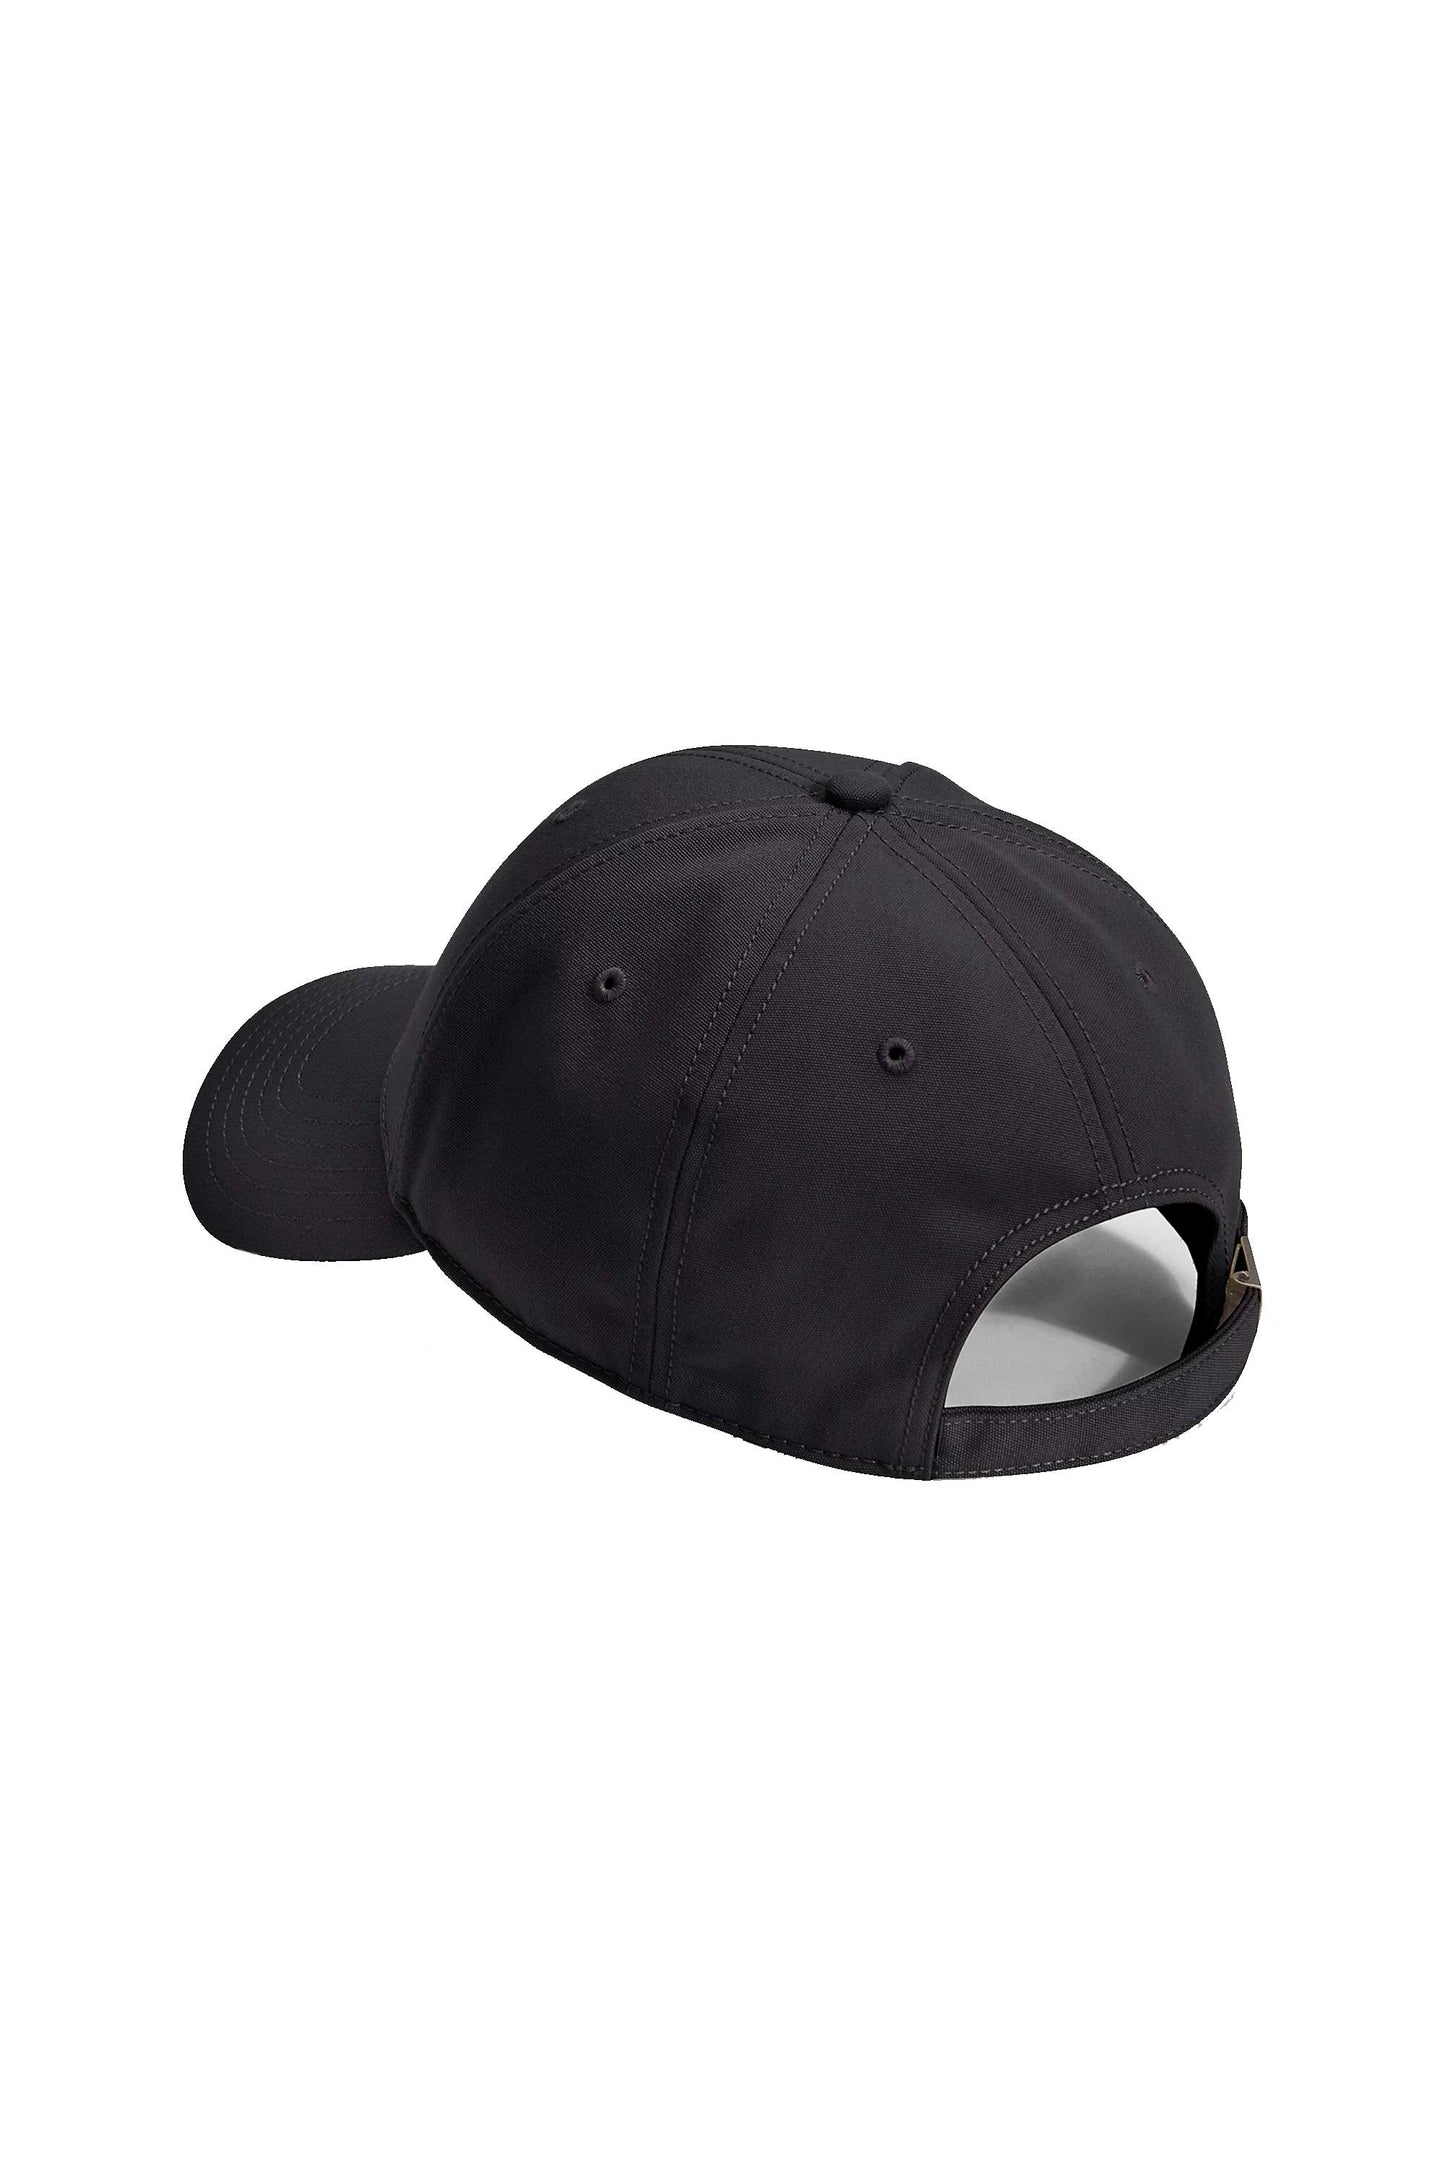 Pukas-Surf-Shop-The-North-Face-recycled-66-classic-hat-black